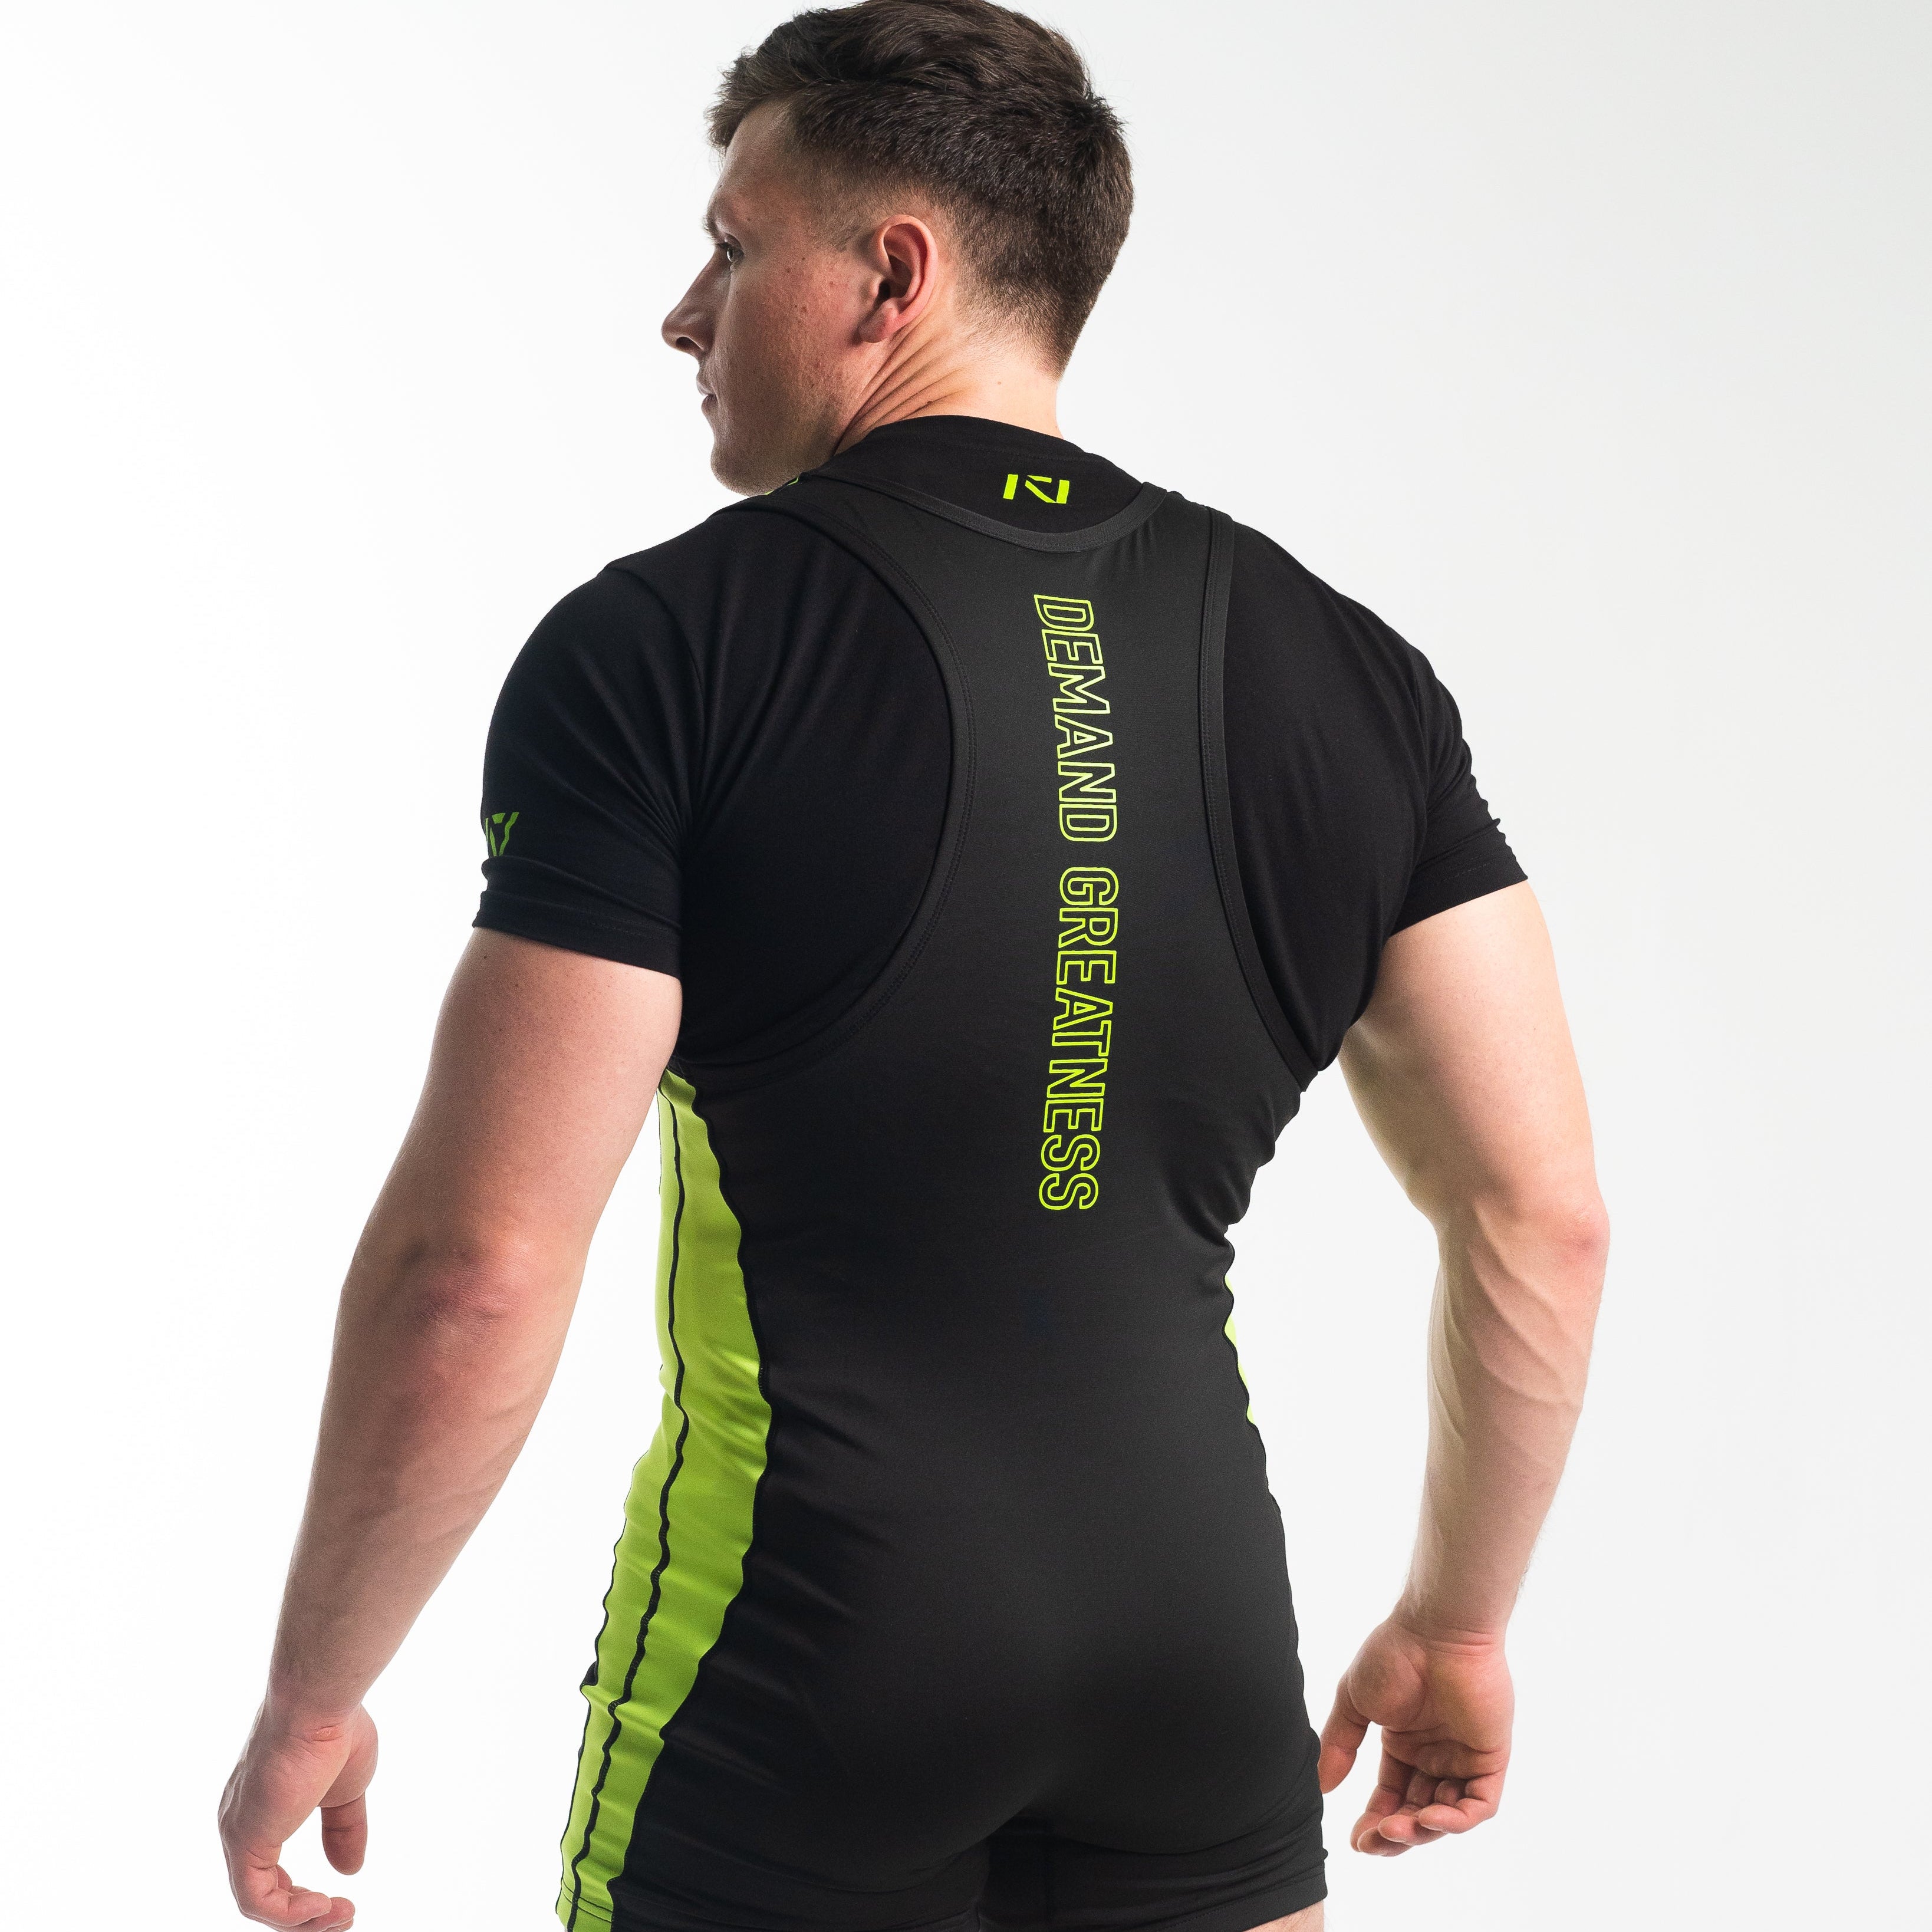 A7 IPF Approved Alien Luno singlet features extra lat mobility, side panel stitching to guide the squat depth level and curved panel design for a slimming look. The Women's cut singlet features a tapered waist and additional quad room. The IPF Approved Kit includes Alien Luno Powerlifting Singlet, A7 Meet Shirt, A7 Deadlift Socks, Hourglass Knee Sleeves (Stiff Knee Sleeves and Rigor Mortis Knee Sleeves). All A7 Powerlifting Equipment shipping to UK, Norway, Switzerland and Iceland.